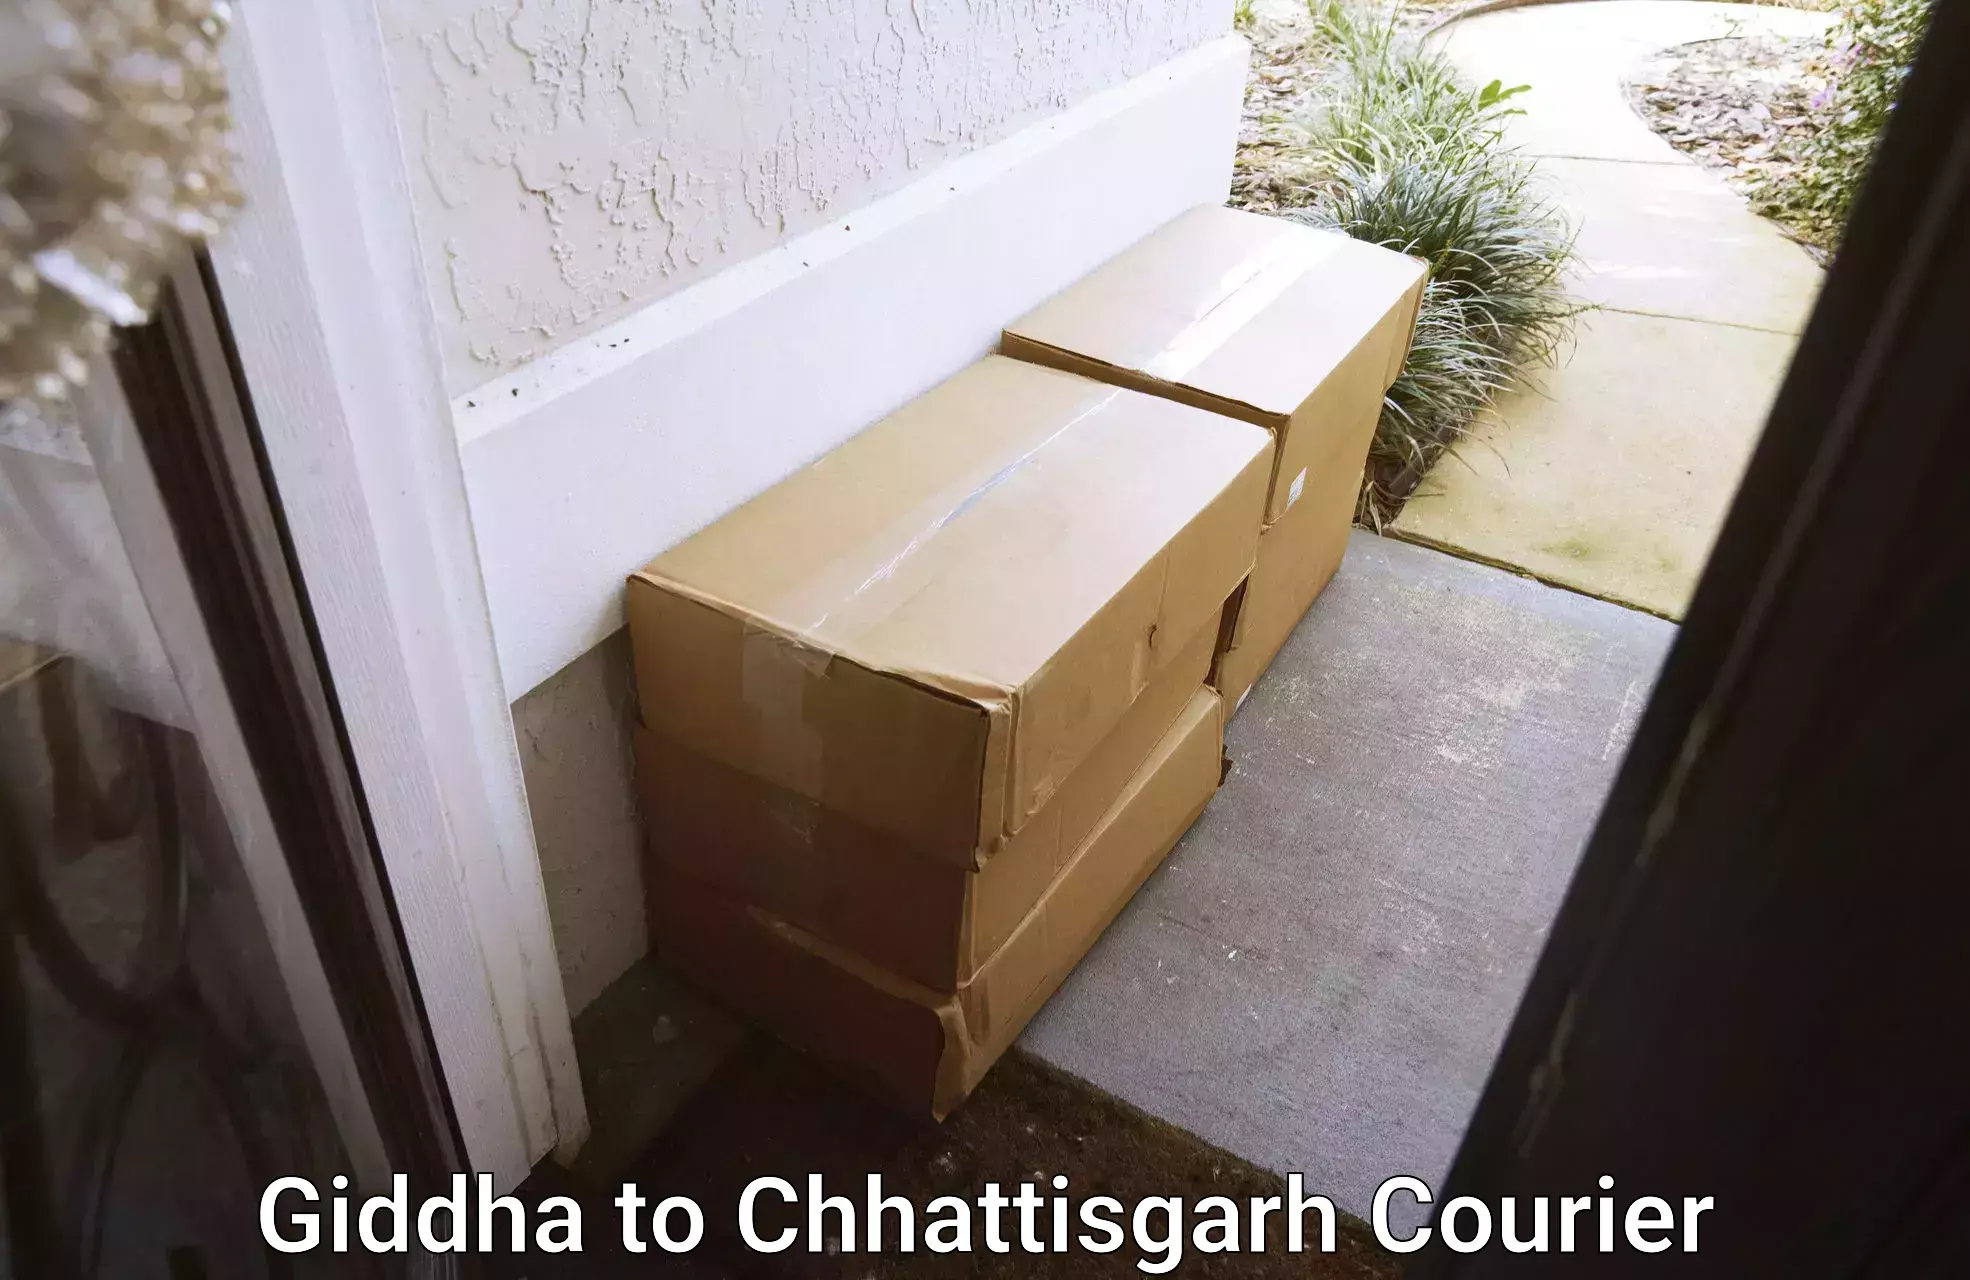 Quality relocation services in Giddha to Bilaspur